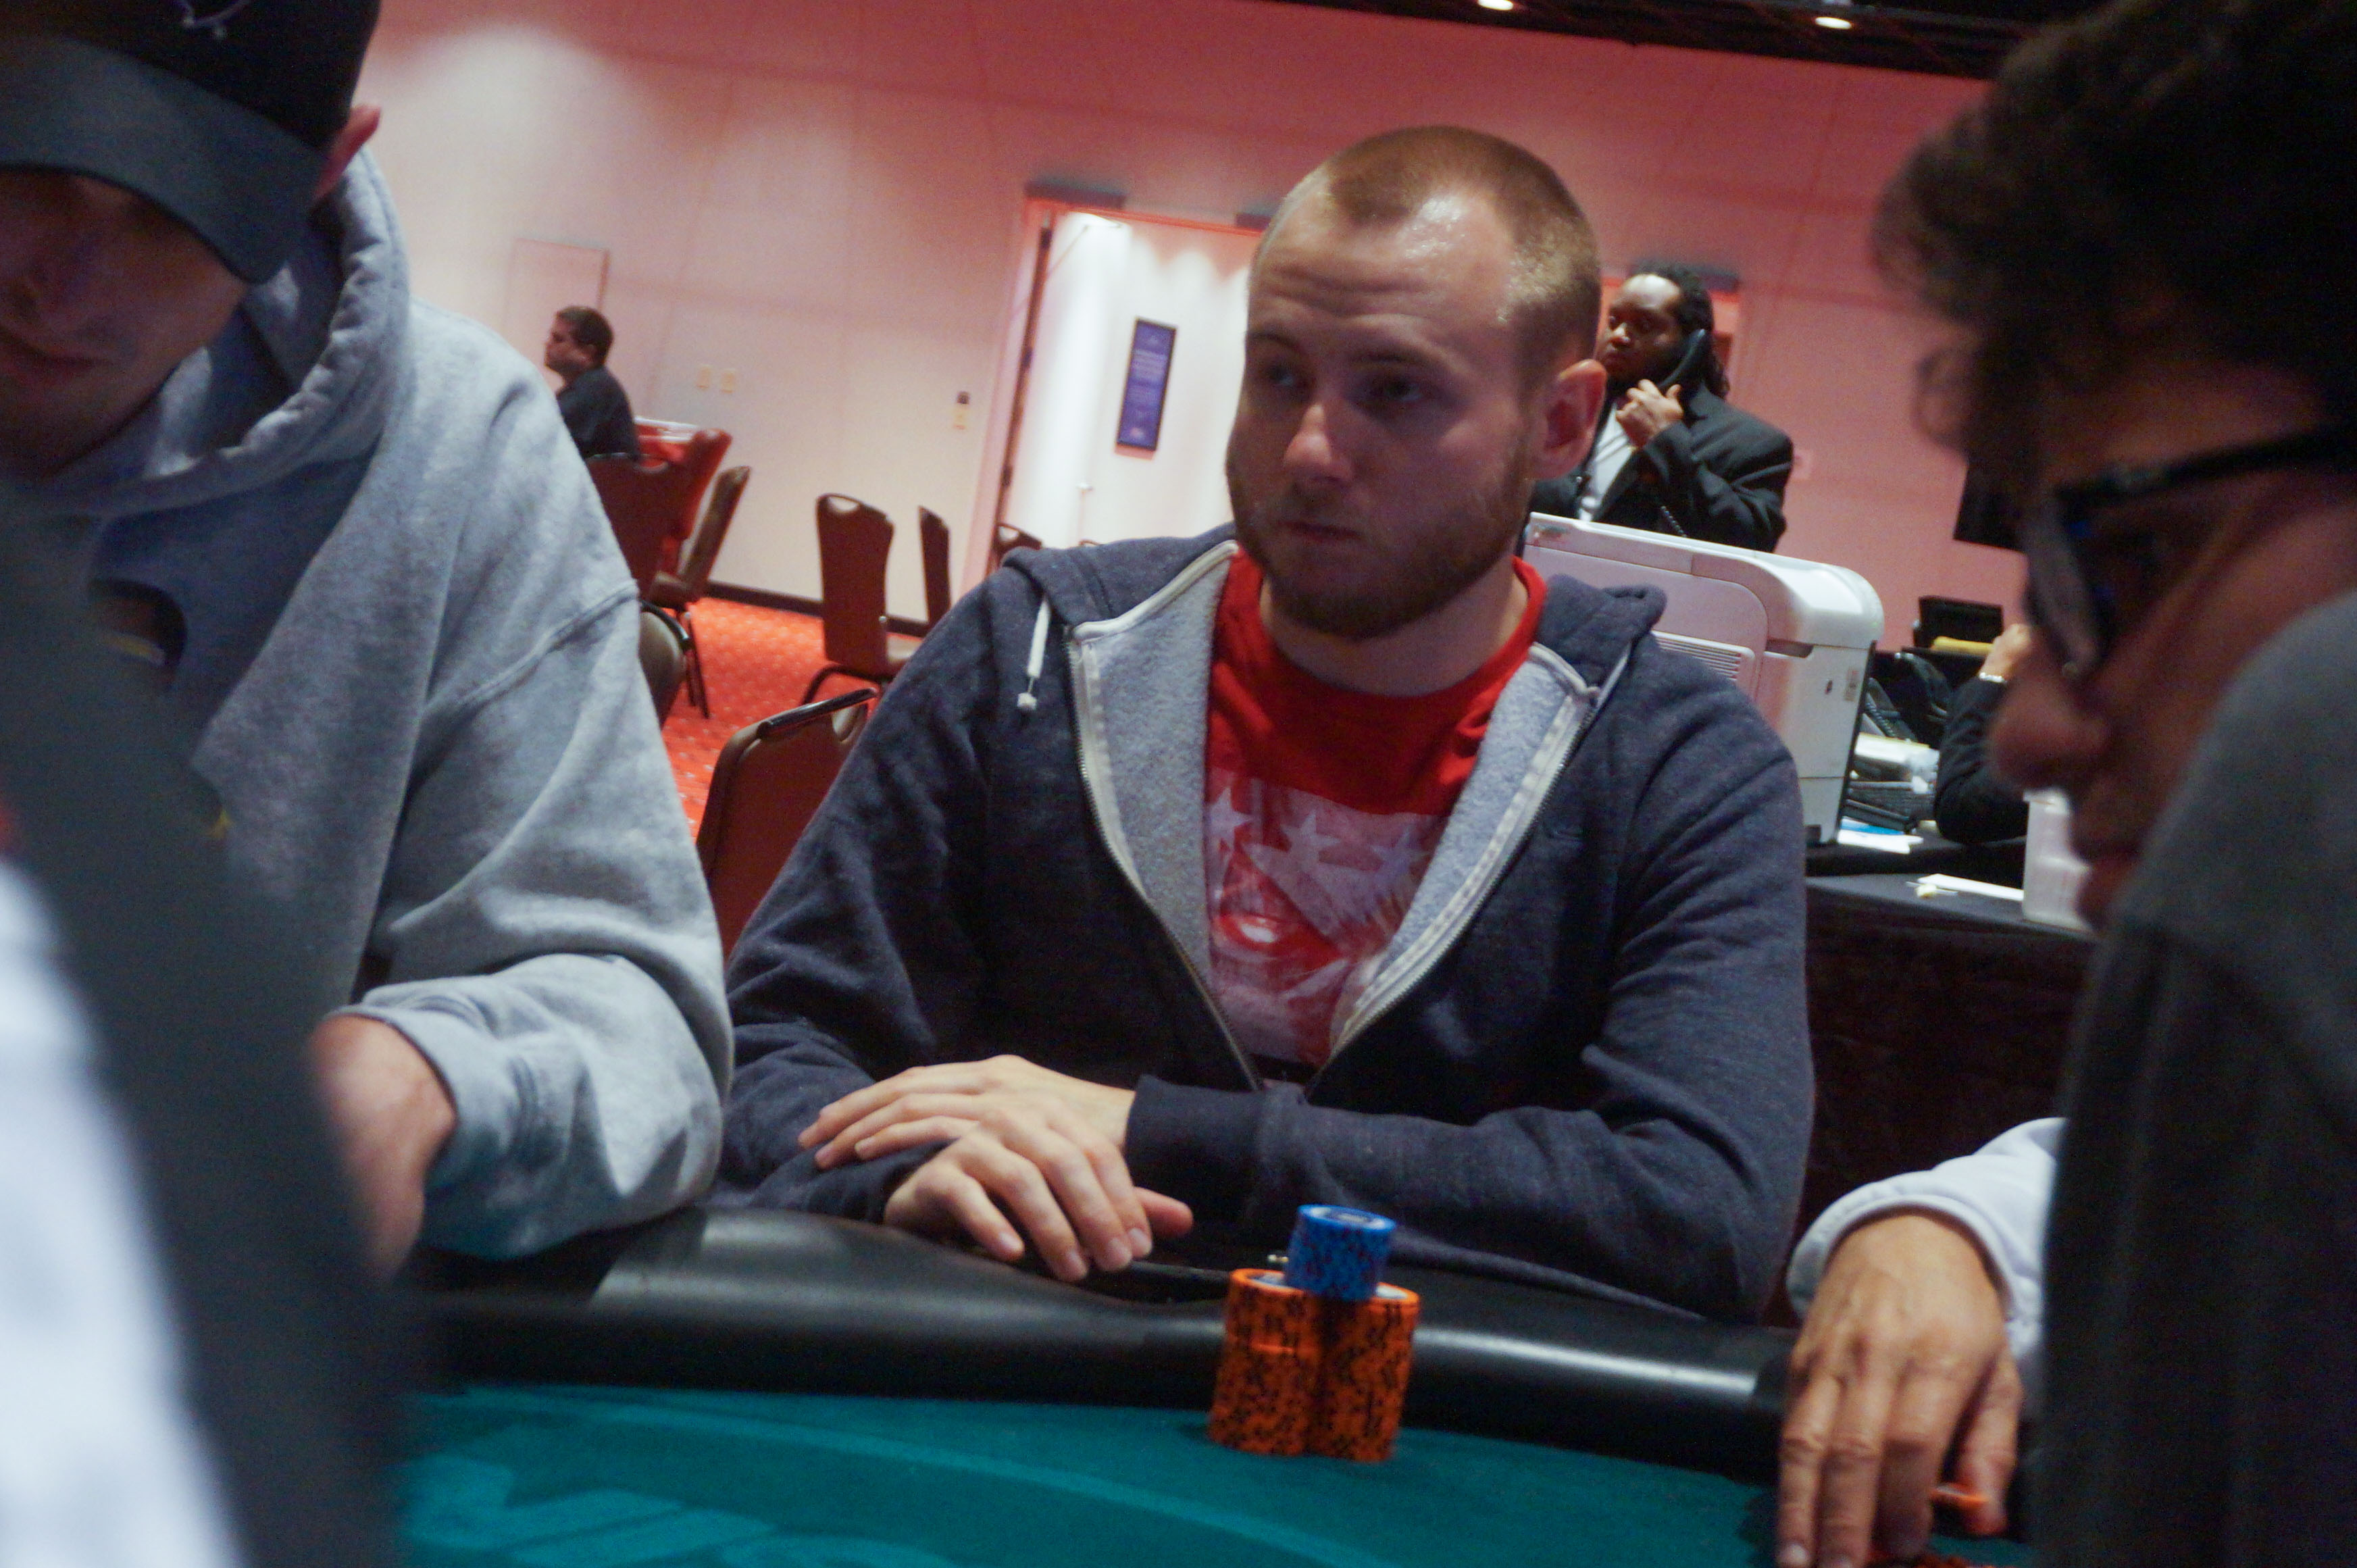 Robert Brown - Eliminated in 8th place ($496)